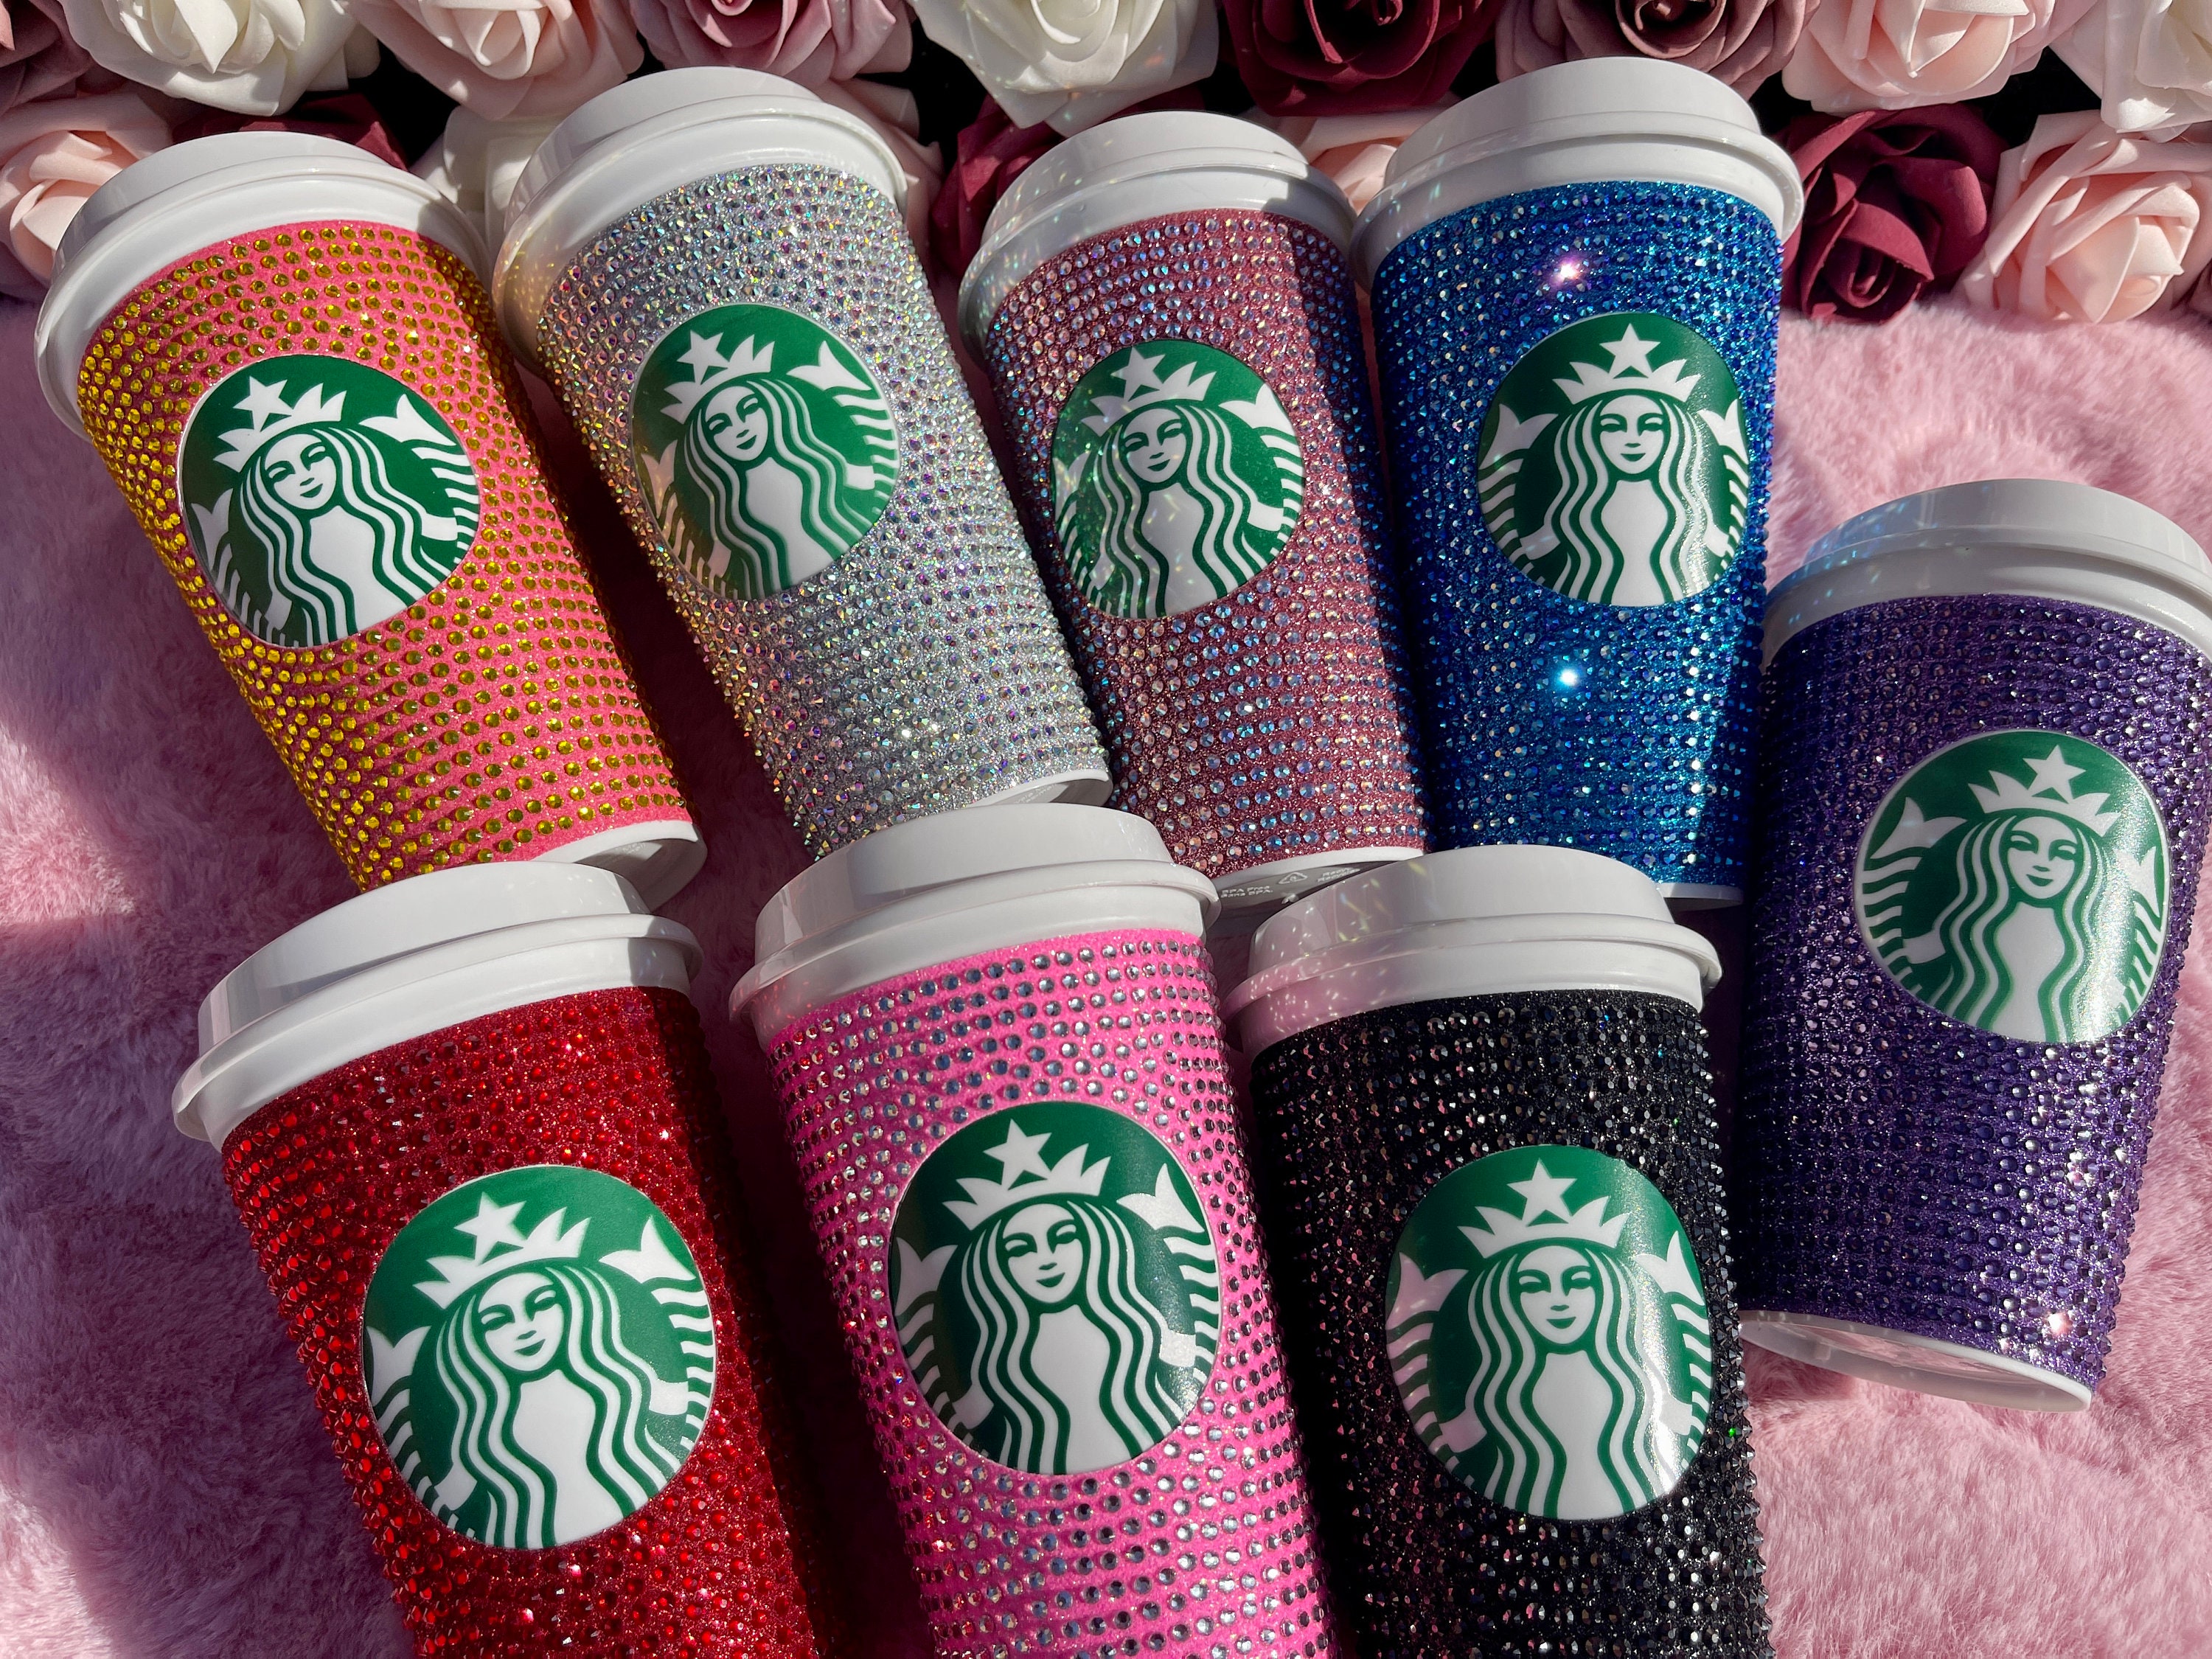 Starbucks Mexico - Reusable Hot Cup - Lid Color Changing - 16Oz.